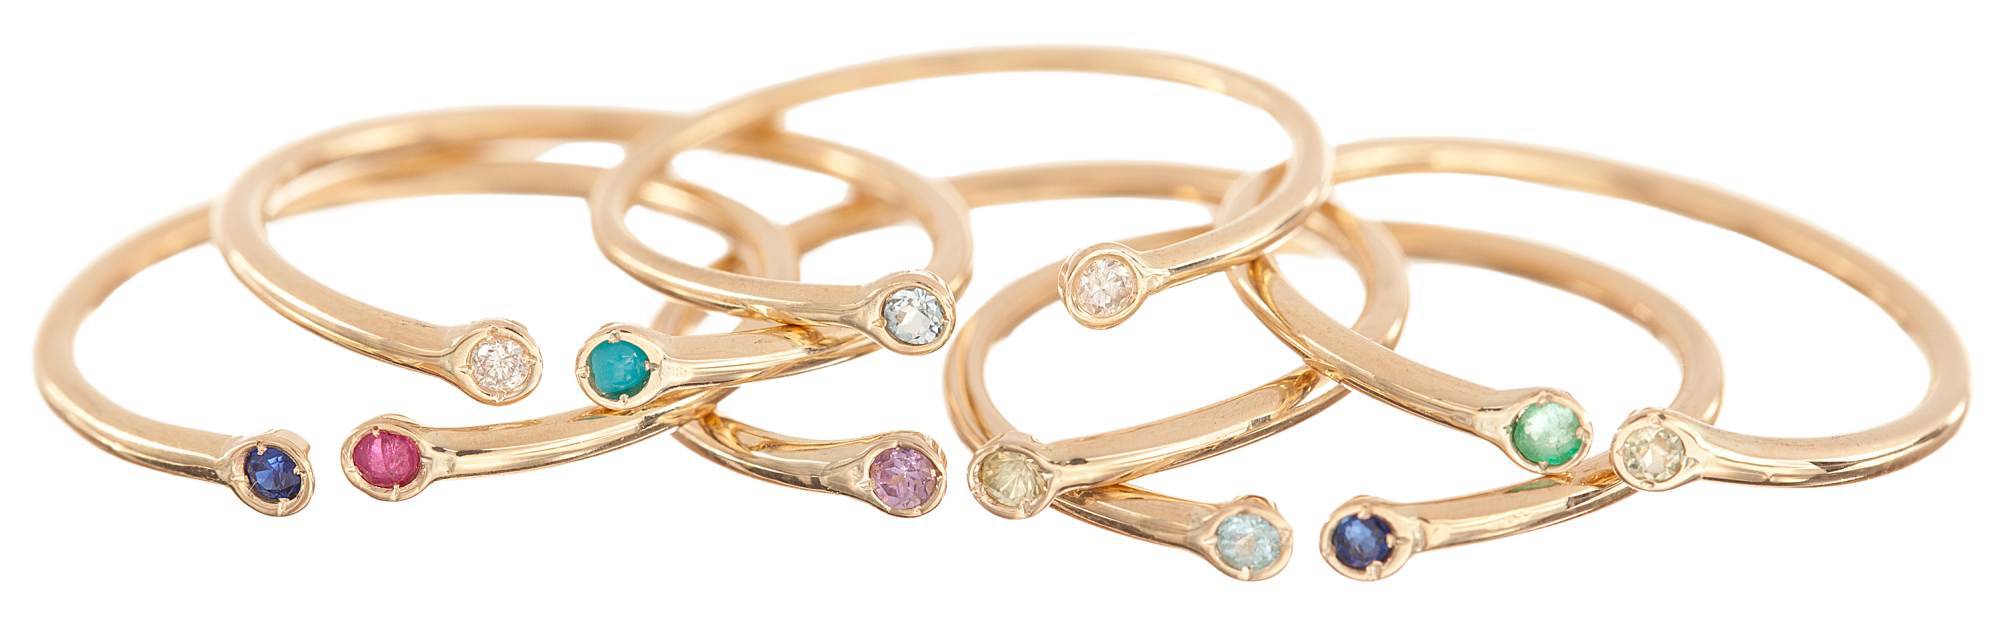 Assorted birthstone rings featuring two stones of differing colors from Ariel Gordon